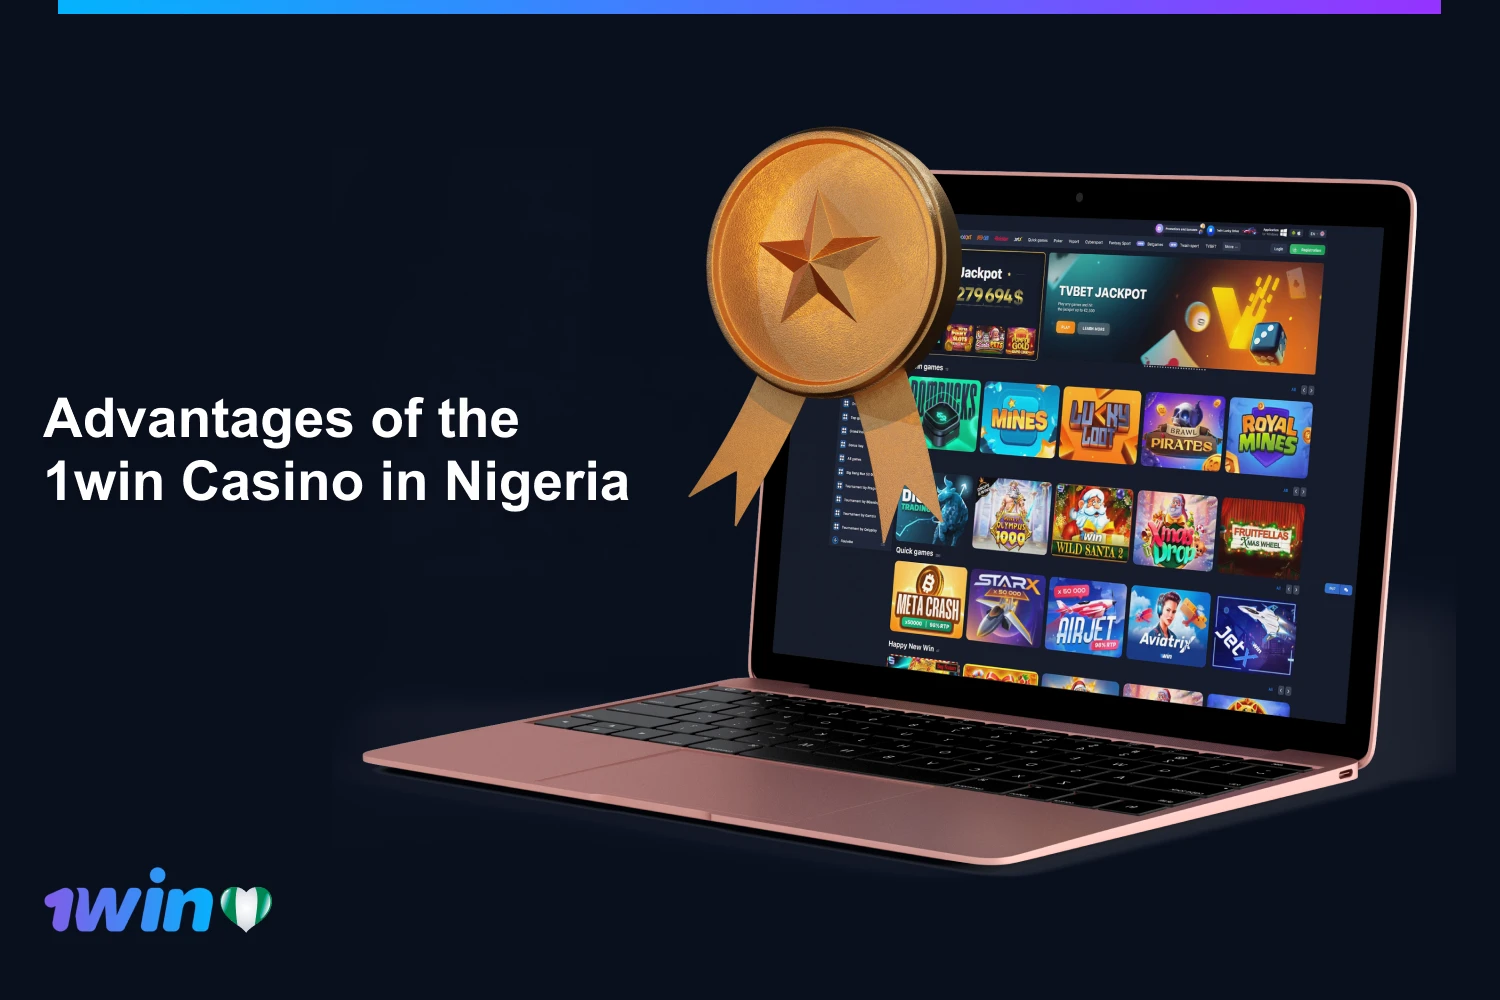 1win offers many different benefits for Nigerian players, which sets it apart from its competitors